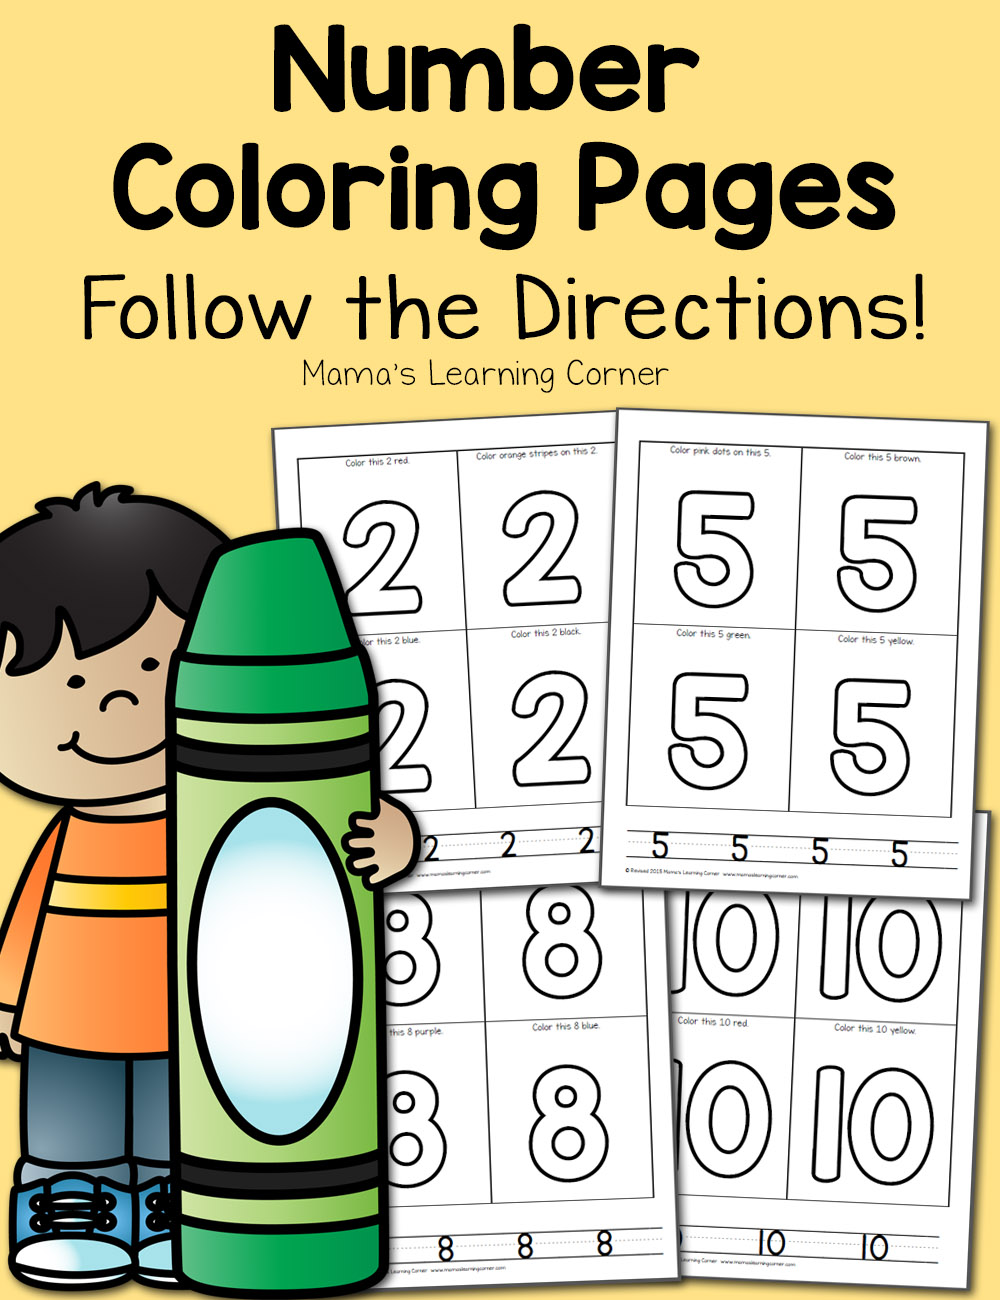 Number Coloring Pages for Preschool   Mamas Learning Corner